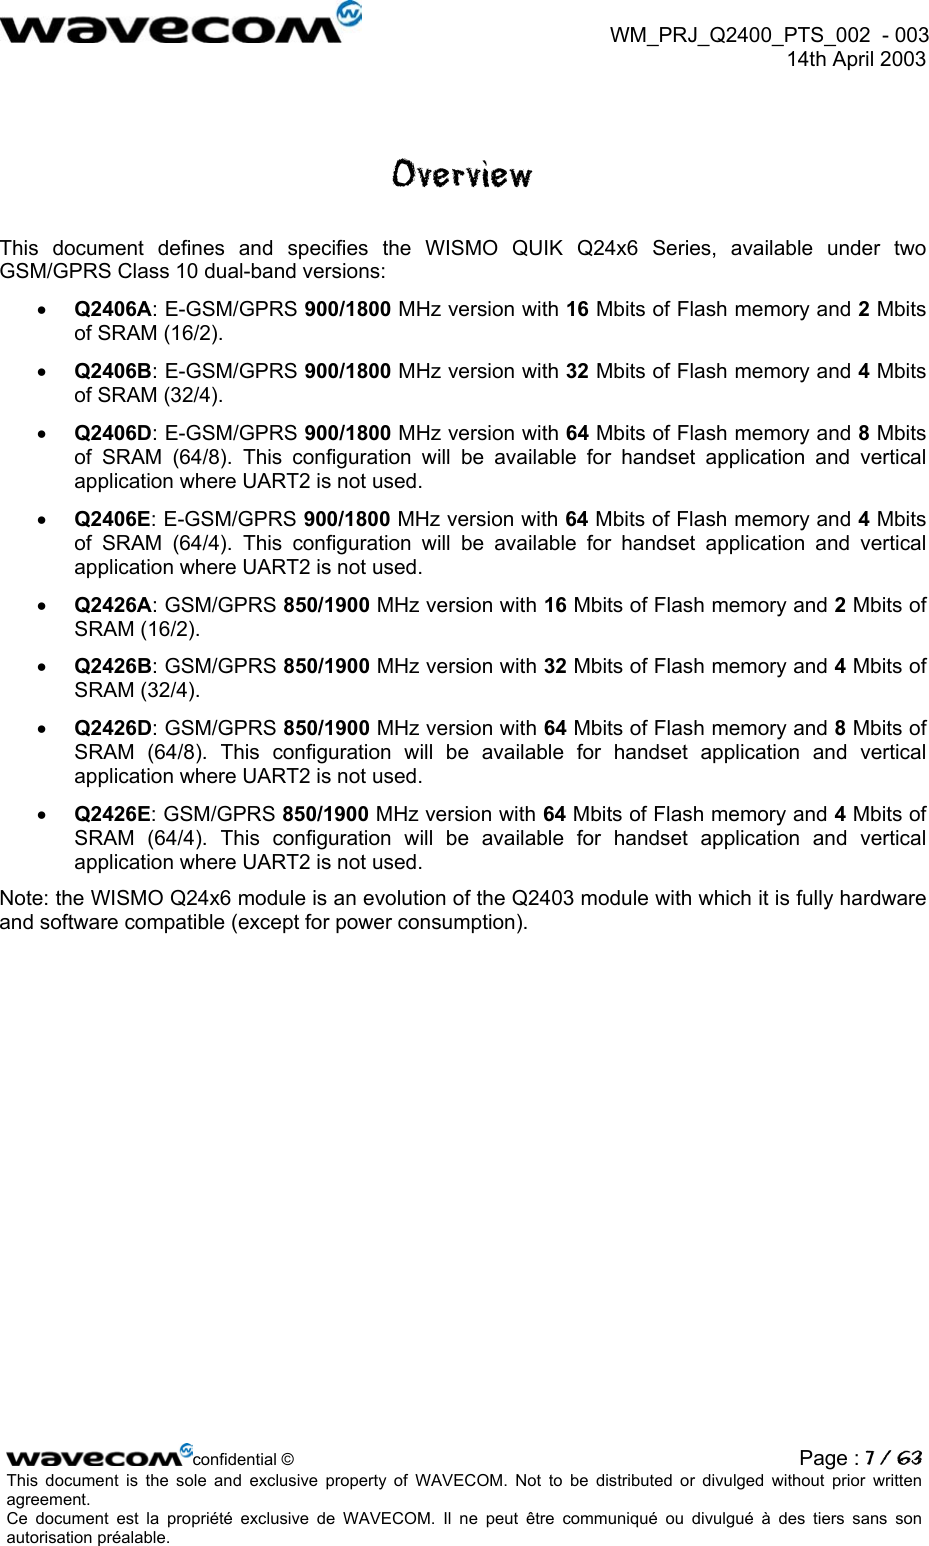  WM_PRJ_Q2400_PTS_002  - 003  14th April 2003   Overview This document defines and specifies the WISMO QUIK Q24x6 Series, available under two GSM/GPRS Class 10 dual-band versions: •  Q2406A: E-GSM/GPRS 900/1800 MHz version with 16 Mbits of Flash memory and 2 Mbits of SRAM (16/2). •  Q2406B: E-GSM/GPRS 900/1800 MHz version with 32 Mbits of Flash memory and 4 Mbits of SRAM (32/4). •  Q2406D: E-GSM/GPRS 900/1800 MHz version with 64 Mbits of Flash memory and 8 Mbits of SRAM (64/8). This configuration will be available for handset application and vertical application where UART2 is not used. •  Q2406E: E-GSM/GPRS 900/1800 MHz version with 64 Mbits of Flash memory and 4 Mbits of SRAM (64/4). This configuration will be available for handset application and vertical application where UART2 is not used. •  Q2426A: GSM/GPRS 850/1900 MHz version with 16 Mbits of Flash memory and 2 Mbits of SRAM (16/2). •  Q2426B: GSM/GPRS 850/1900 MHz version with 32 Mbits of Flash memory and 4 Mbits of SRAM (32/4). •  Q2426D: GSM/GPRS 850/1900 MHz version with 64 Mbits of Flash memory and 8 Mbits of SRAM (64/8). This configuration will be available for handset application and vertical application where UART2 is not used. •  Q2426E: GSM/GPRS 850/1900 MHz version with 64 Mbits of Flash memory and 4 Mbits of SRAM (64/4). This configuration will be available for handset application and vertical application where UART2 is not used. Note: the WISMO Q24x6 module is an evolution of the Q2403 module with which it is fully hardware and software compatible (except for power consumption).     confidential © Page : 7 / 63This document is the sole and exclusive property of WAVECOM. Not to be distributed or divulged without prior written agreement.  Ce document est la propriété exclusive de WAVECOM. Il ne peut être communiqué ou divulgué à des tiers sans son autorisation préalable.  